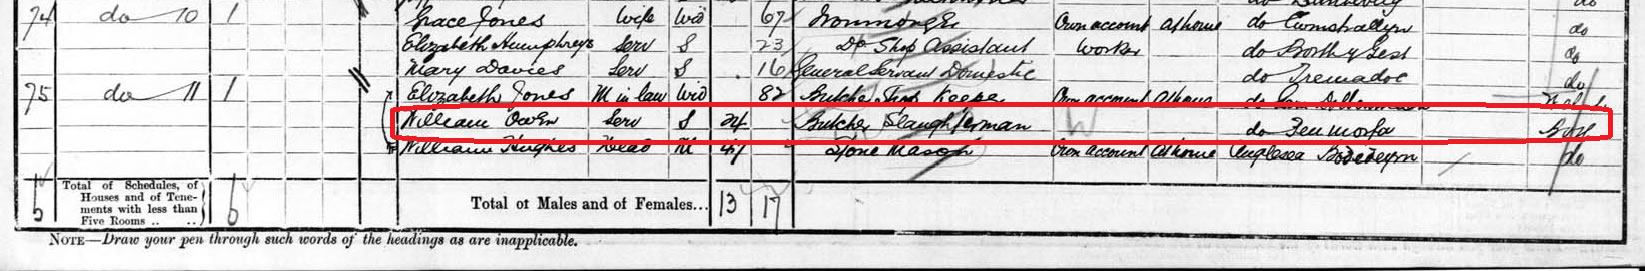 1901 census for 11 Bank Place, Tremadoc - William Owen, 24, a Butcher Slaughterman.